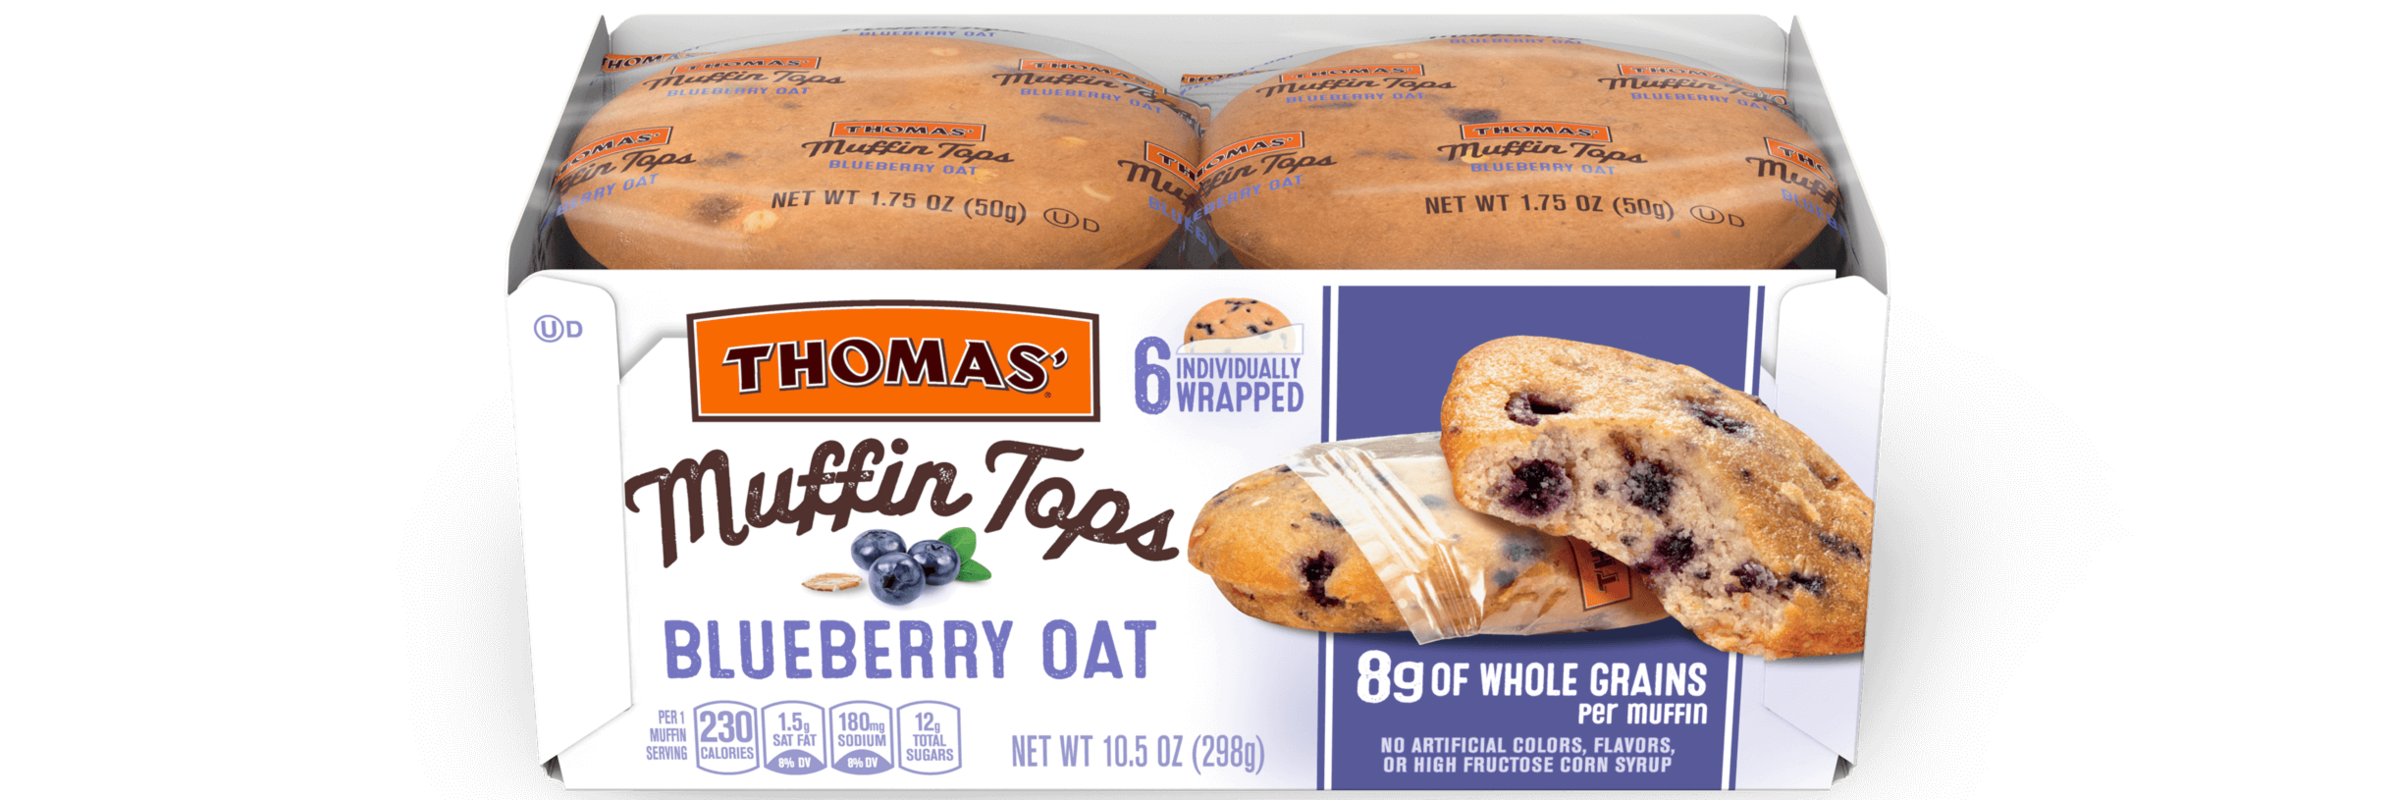 https://thomasbreads.com/sites/default/files/styles/product_wide_detail/public/product/2023-06/blueberry-oat-muffin-tops.png?itok=rAkPOGTq